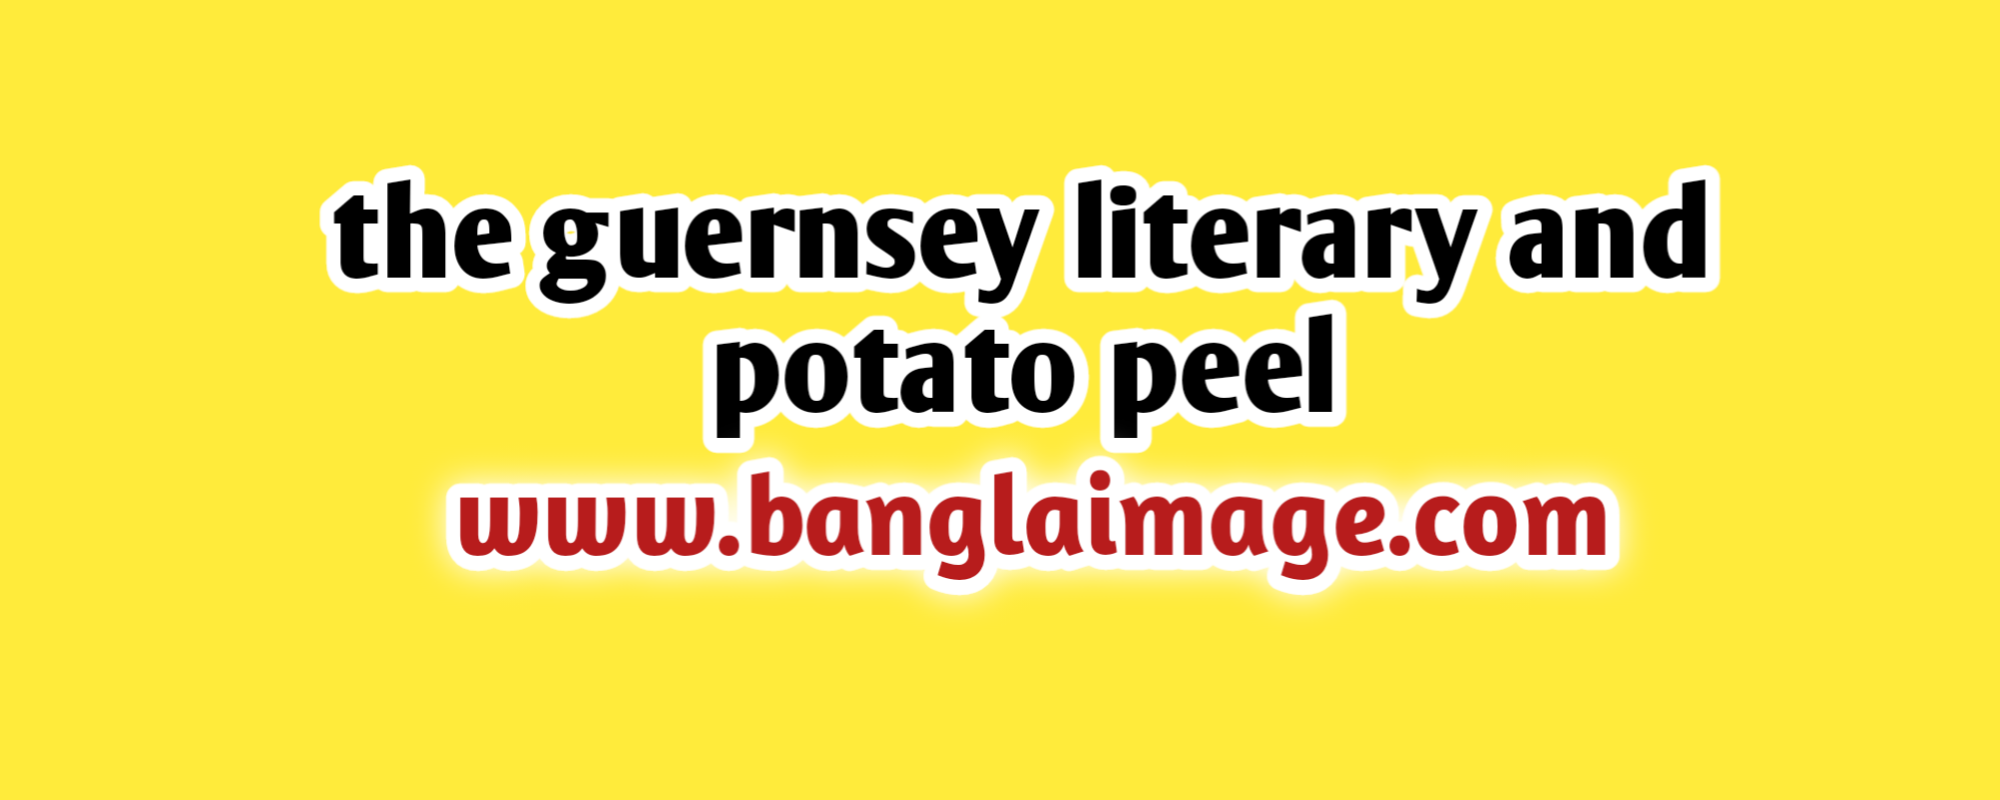 the guernsey literary and potato peel pie society book pdf, the guernsey literary and potato peel pie society book pdf drive file, the guernsey literary and potato peel pie society book pdf now, the the guernsey literary and potato peel pie society book pdf drive file